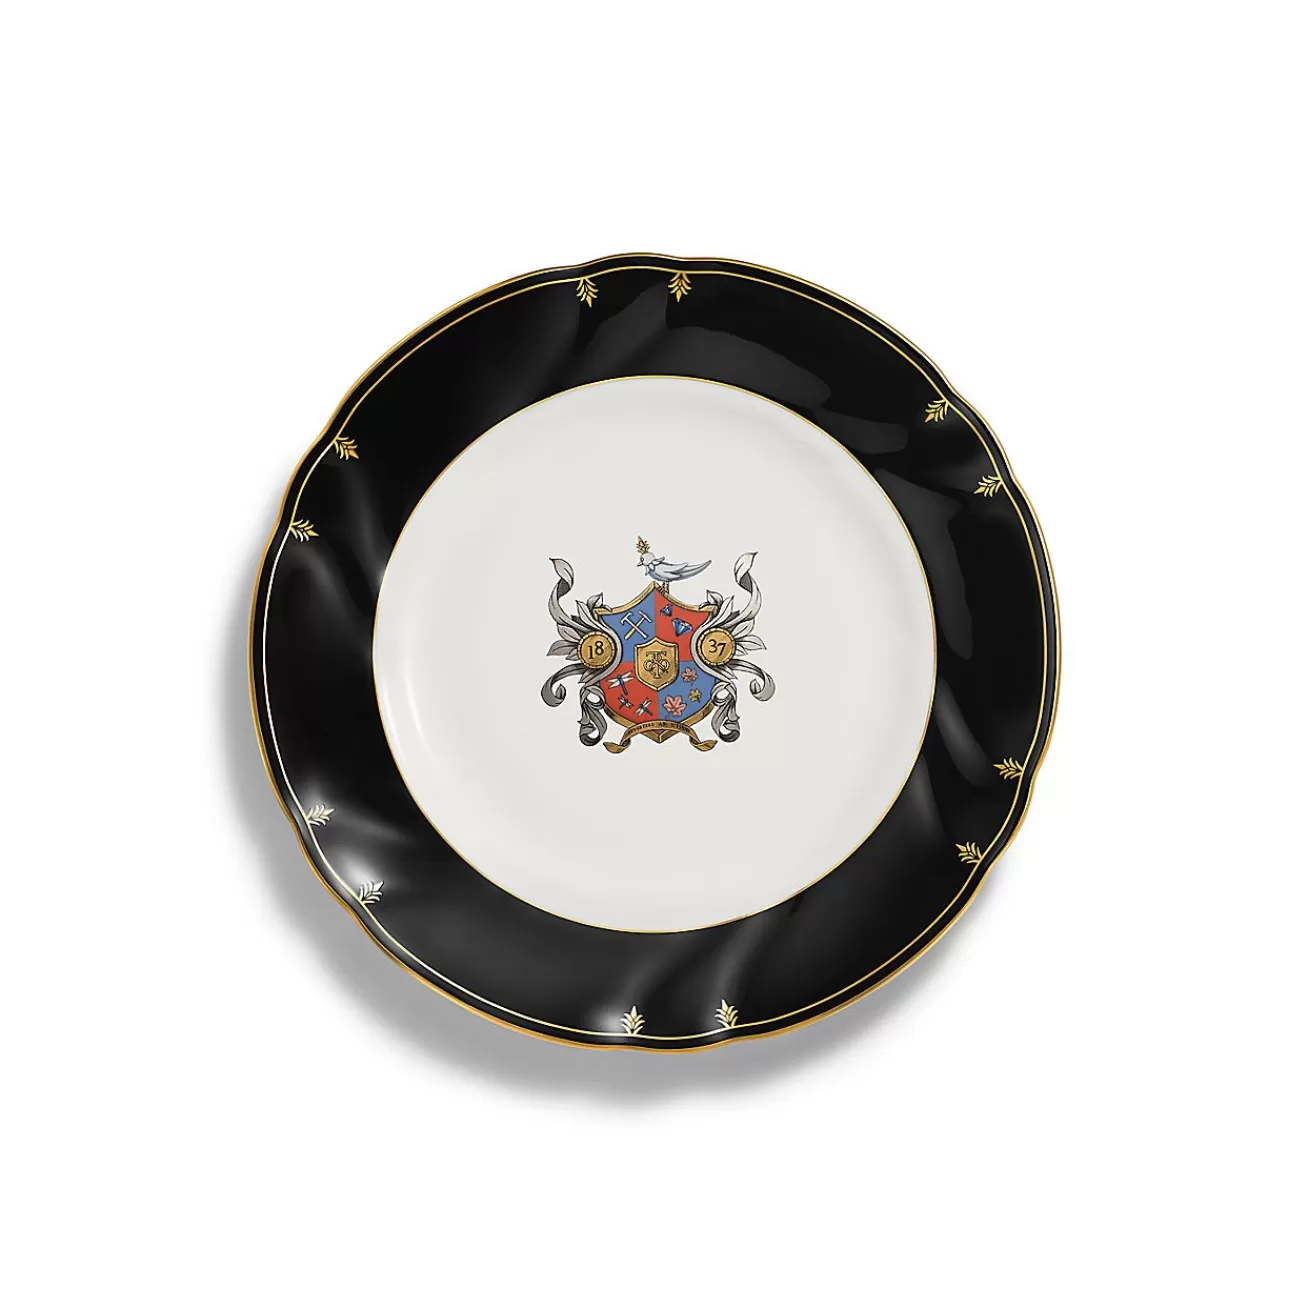 Tiffany & Co. Tiffany Crest Dessert Plate in Bone China | ^ The Home | Housewarming Gifts